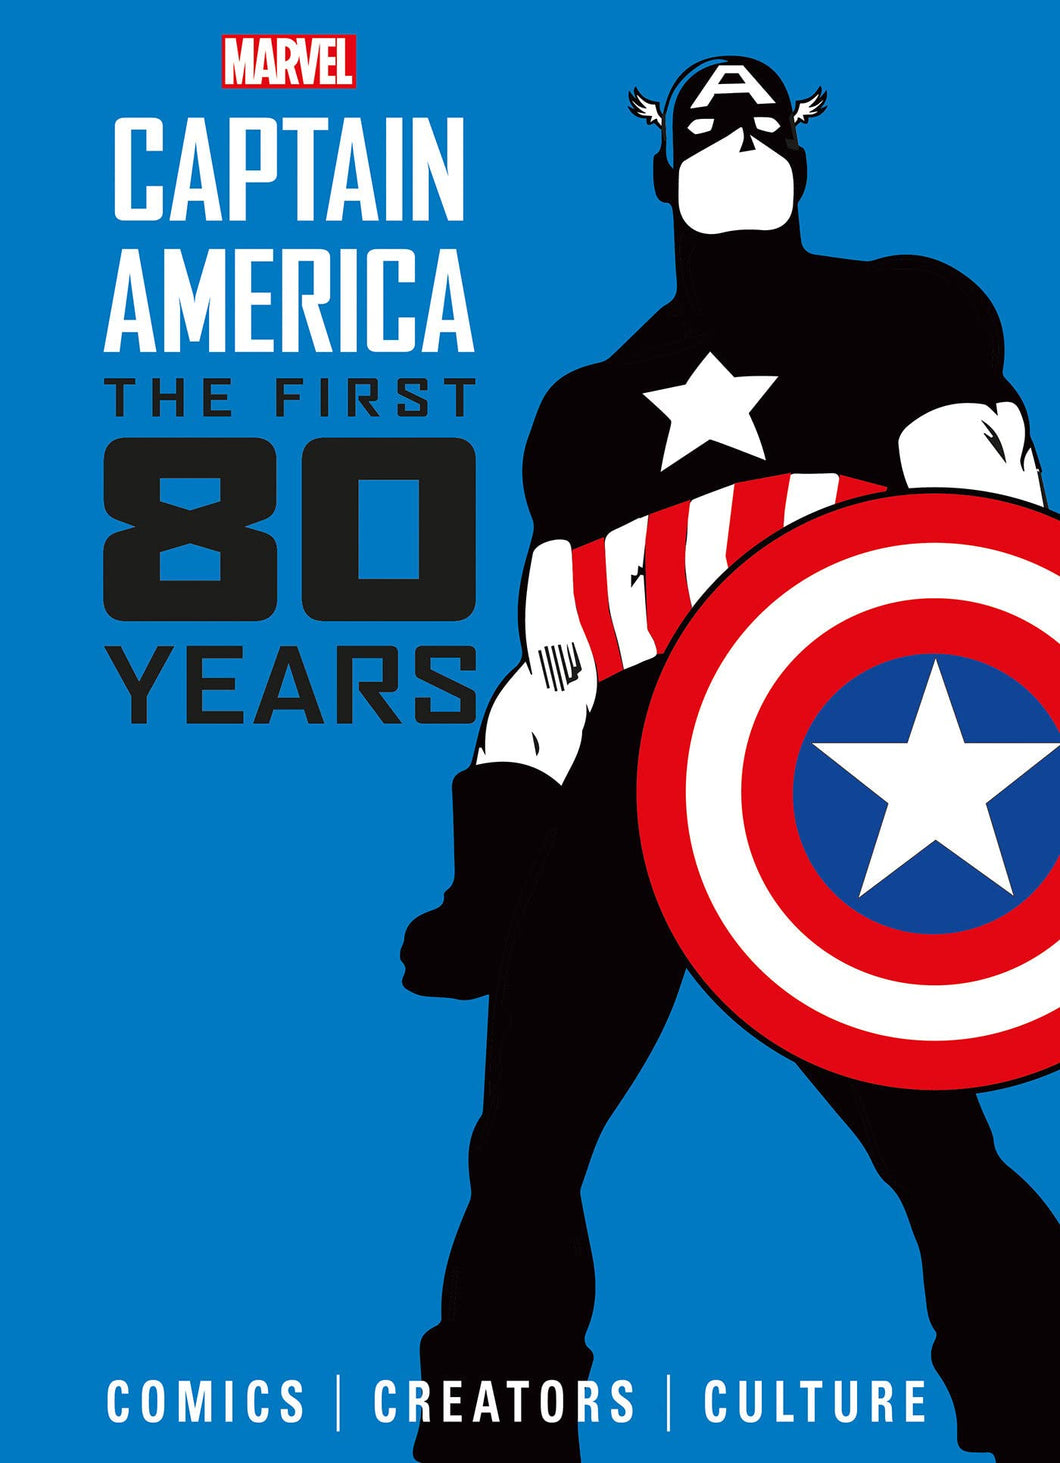 Marvel's Captain America: The First 80 Years